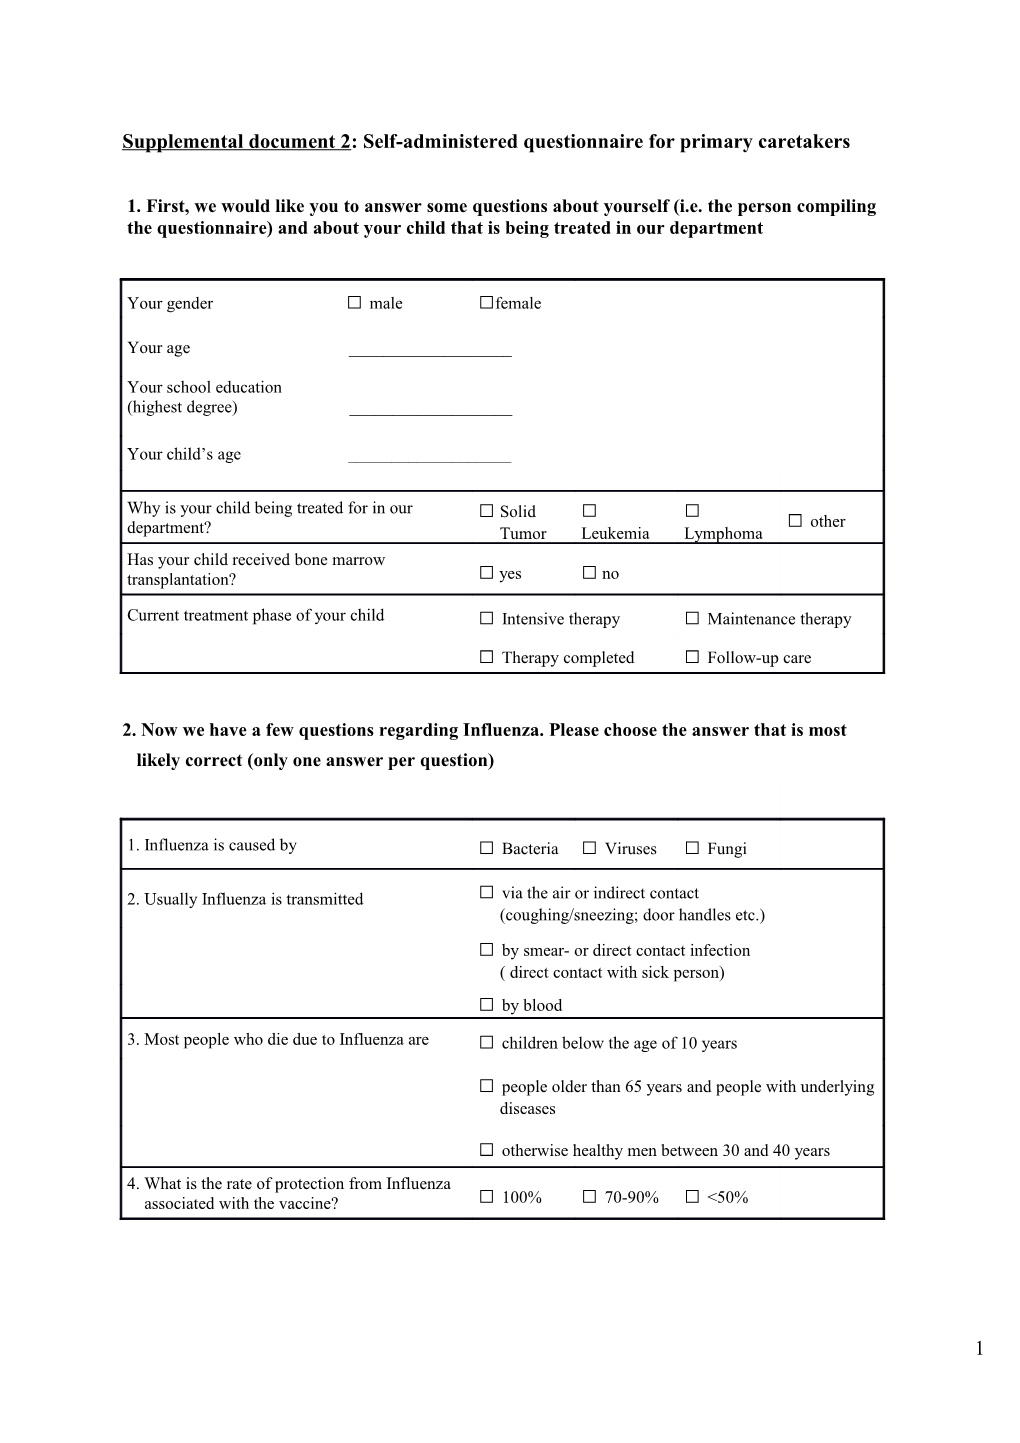 Supplemental Document 2: Self-Administered Questionnaire for Primary Caretakers